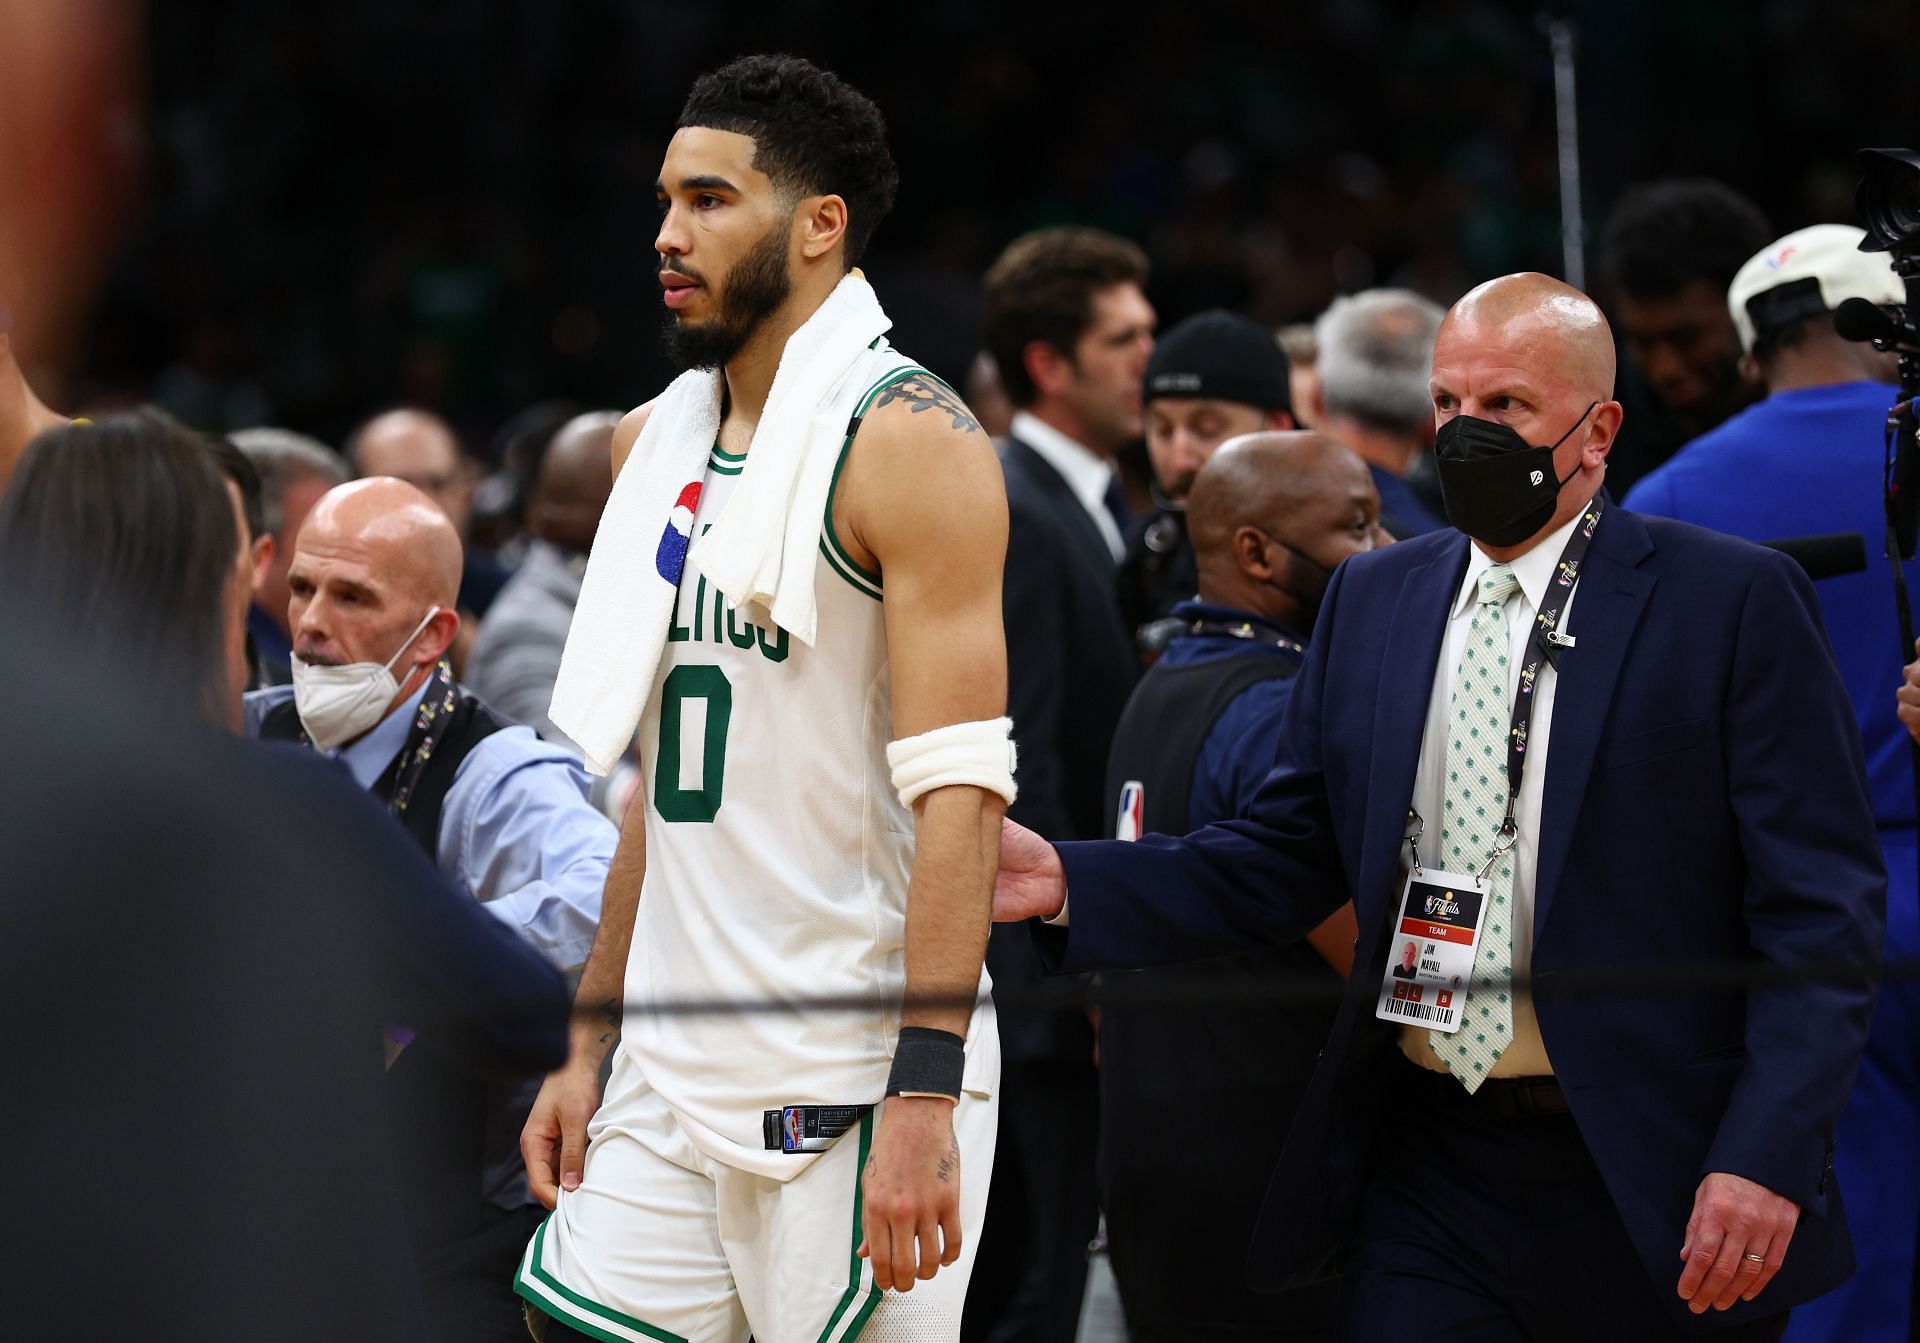 Jayson Tatum of the Boston Celtics walks off the floor after losing in the 2022 NBA Finals